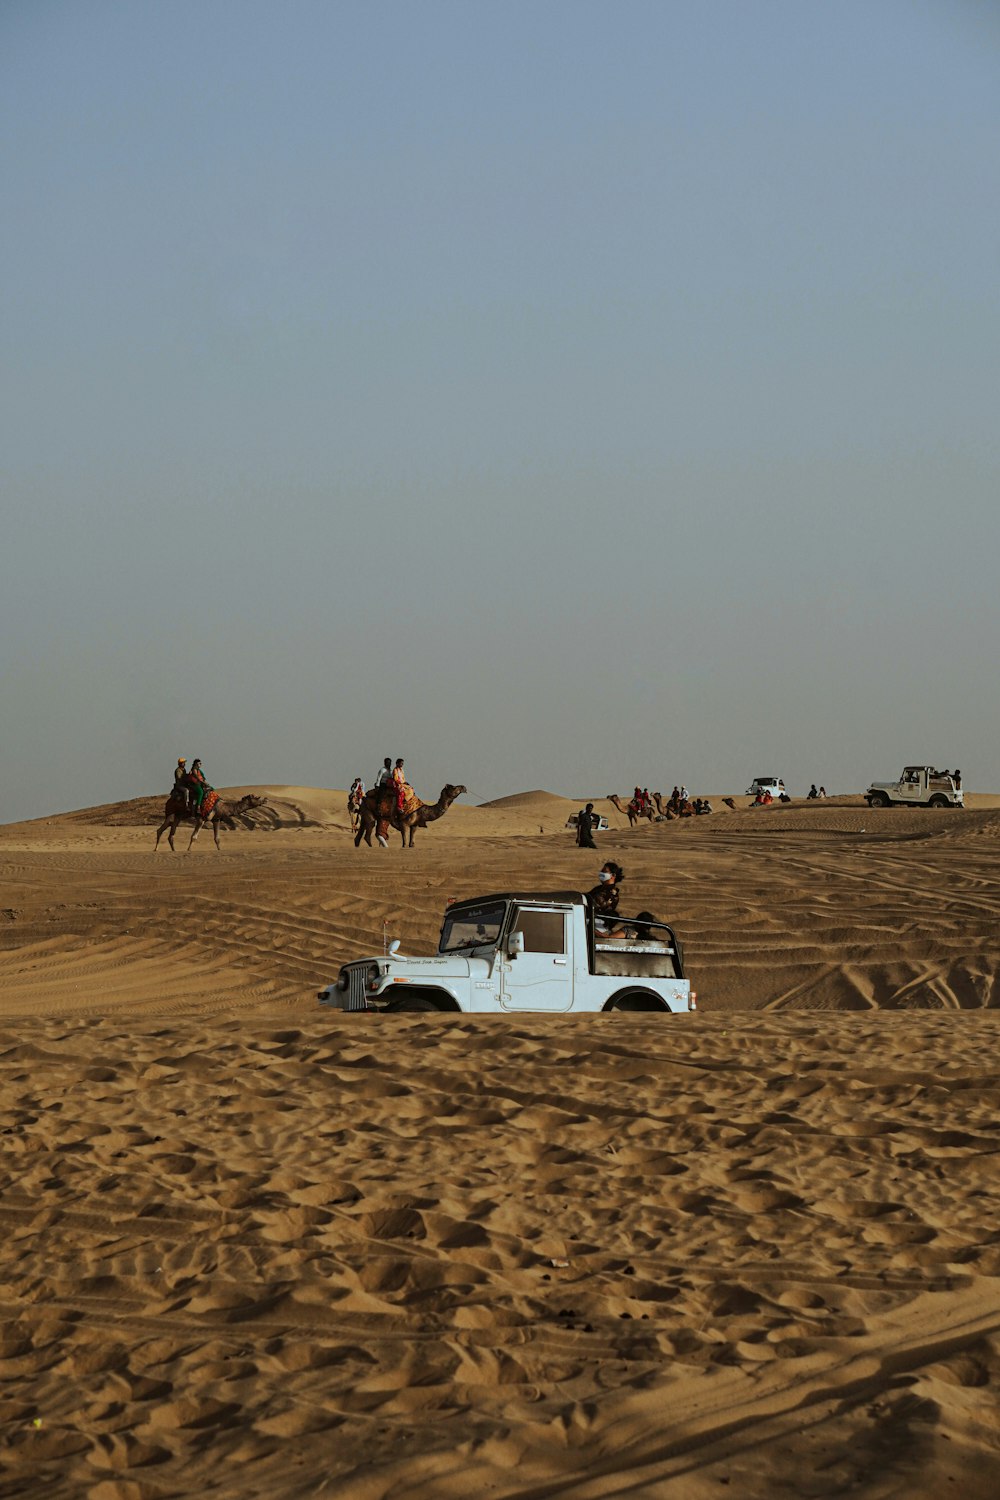 a car in the middle of a desert with camels in the background